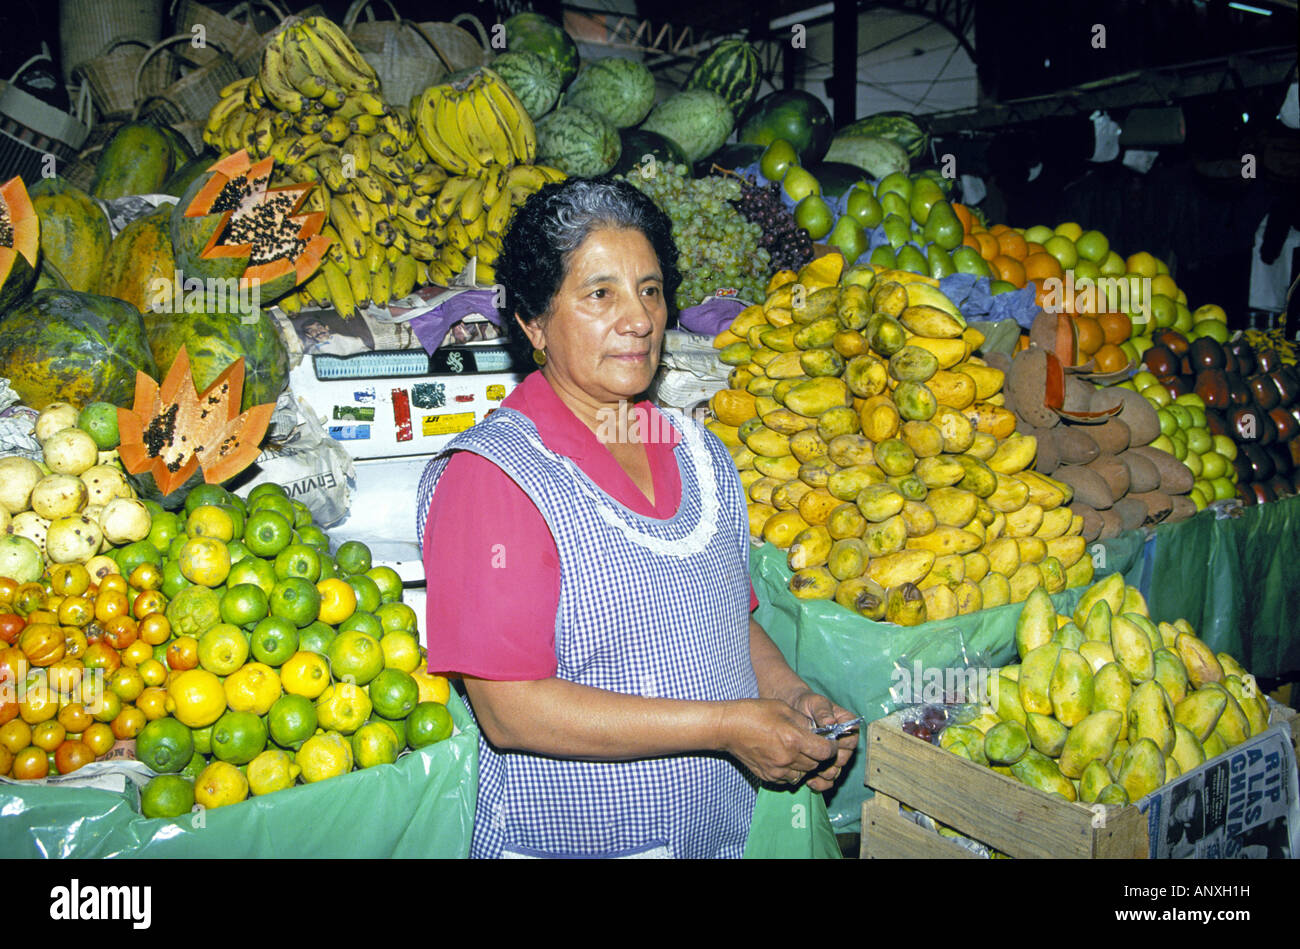 A Mexican woman sells fresh fruits and vegetables many from the rain forest in a large open farmer s market in Cancun, Mexico. Stock Photo